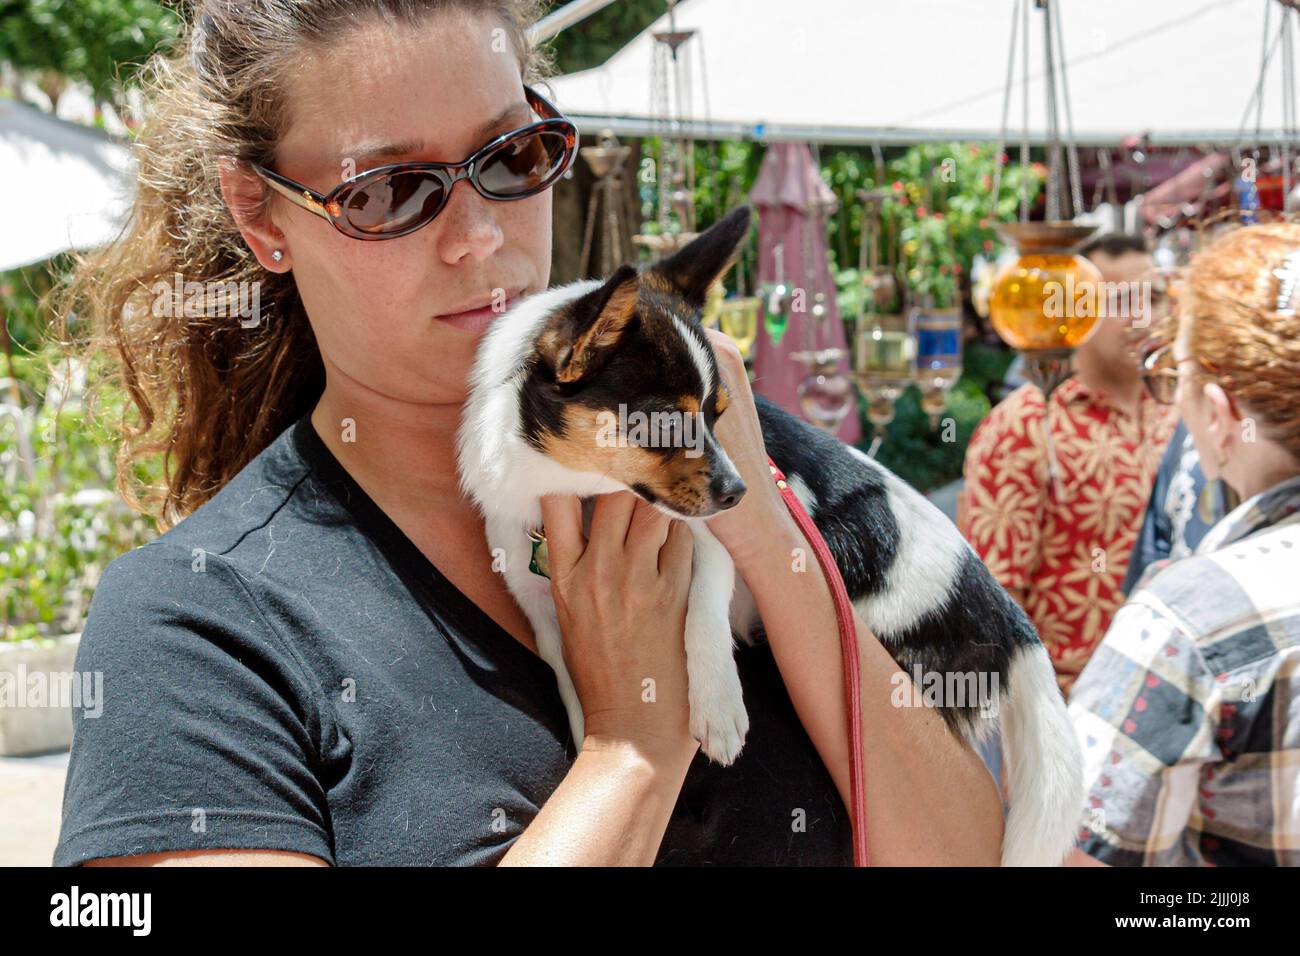 Miami Beach Florida,Lincoln Road pedestrian mall adult adults woman women female lady,holding pet pets dog dogs,people person scene in a photo Stock Photo